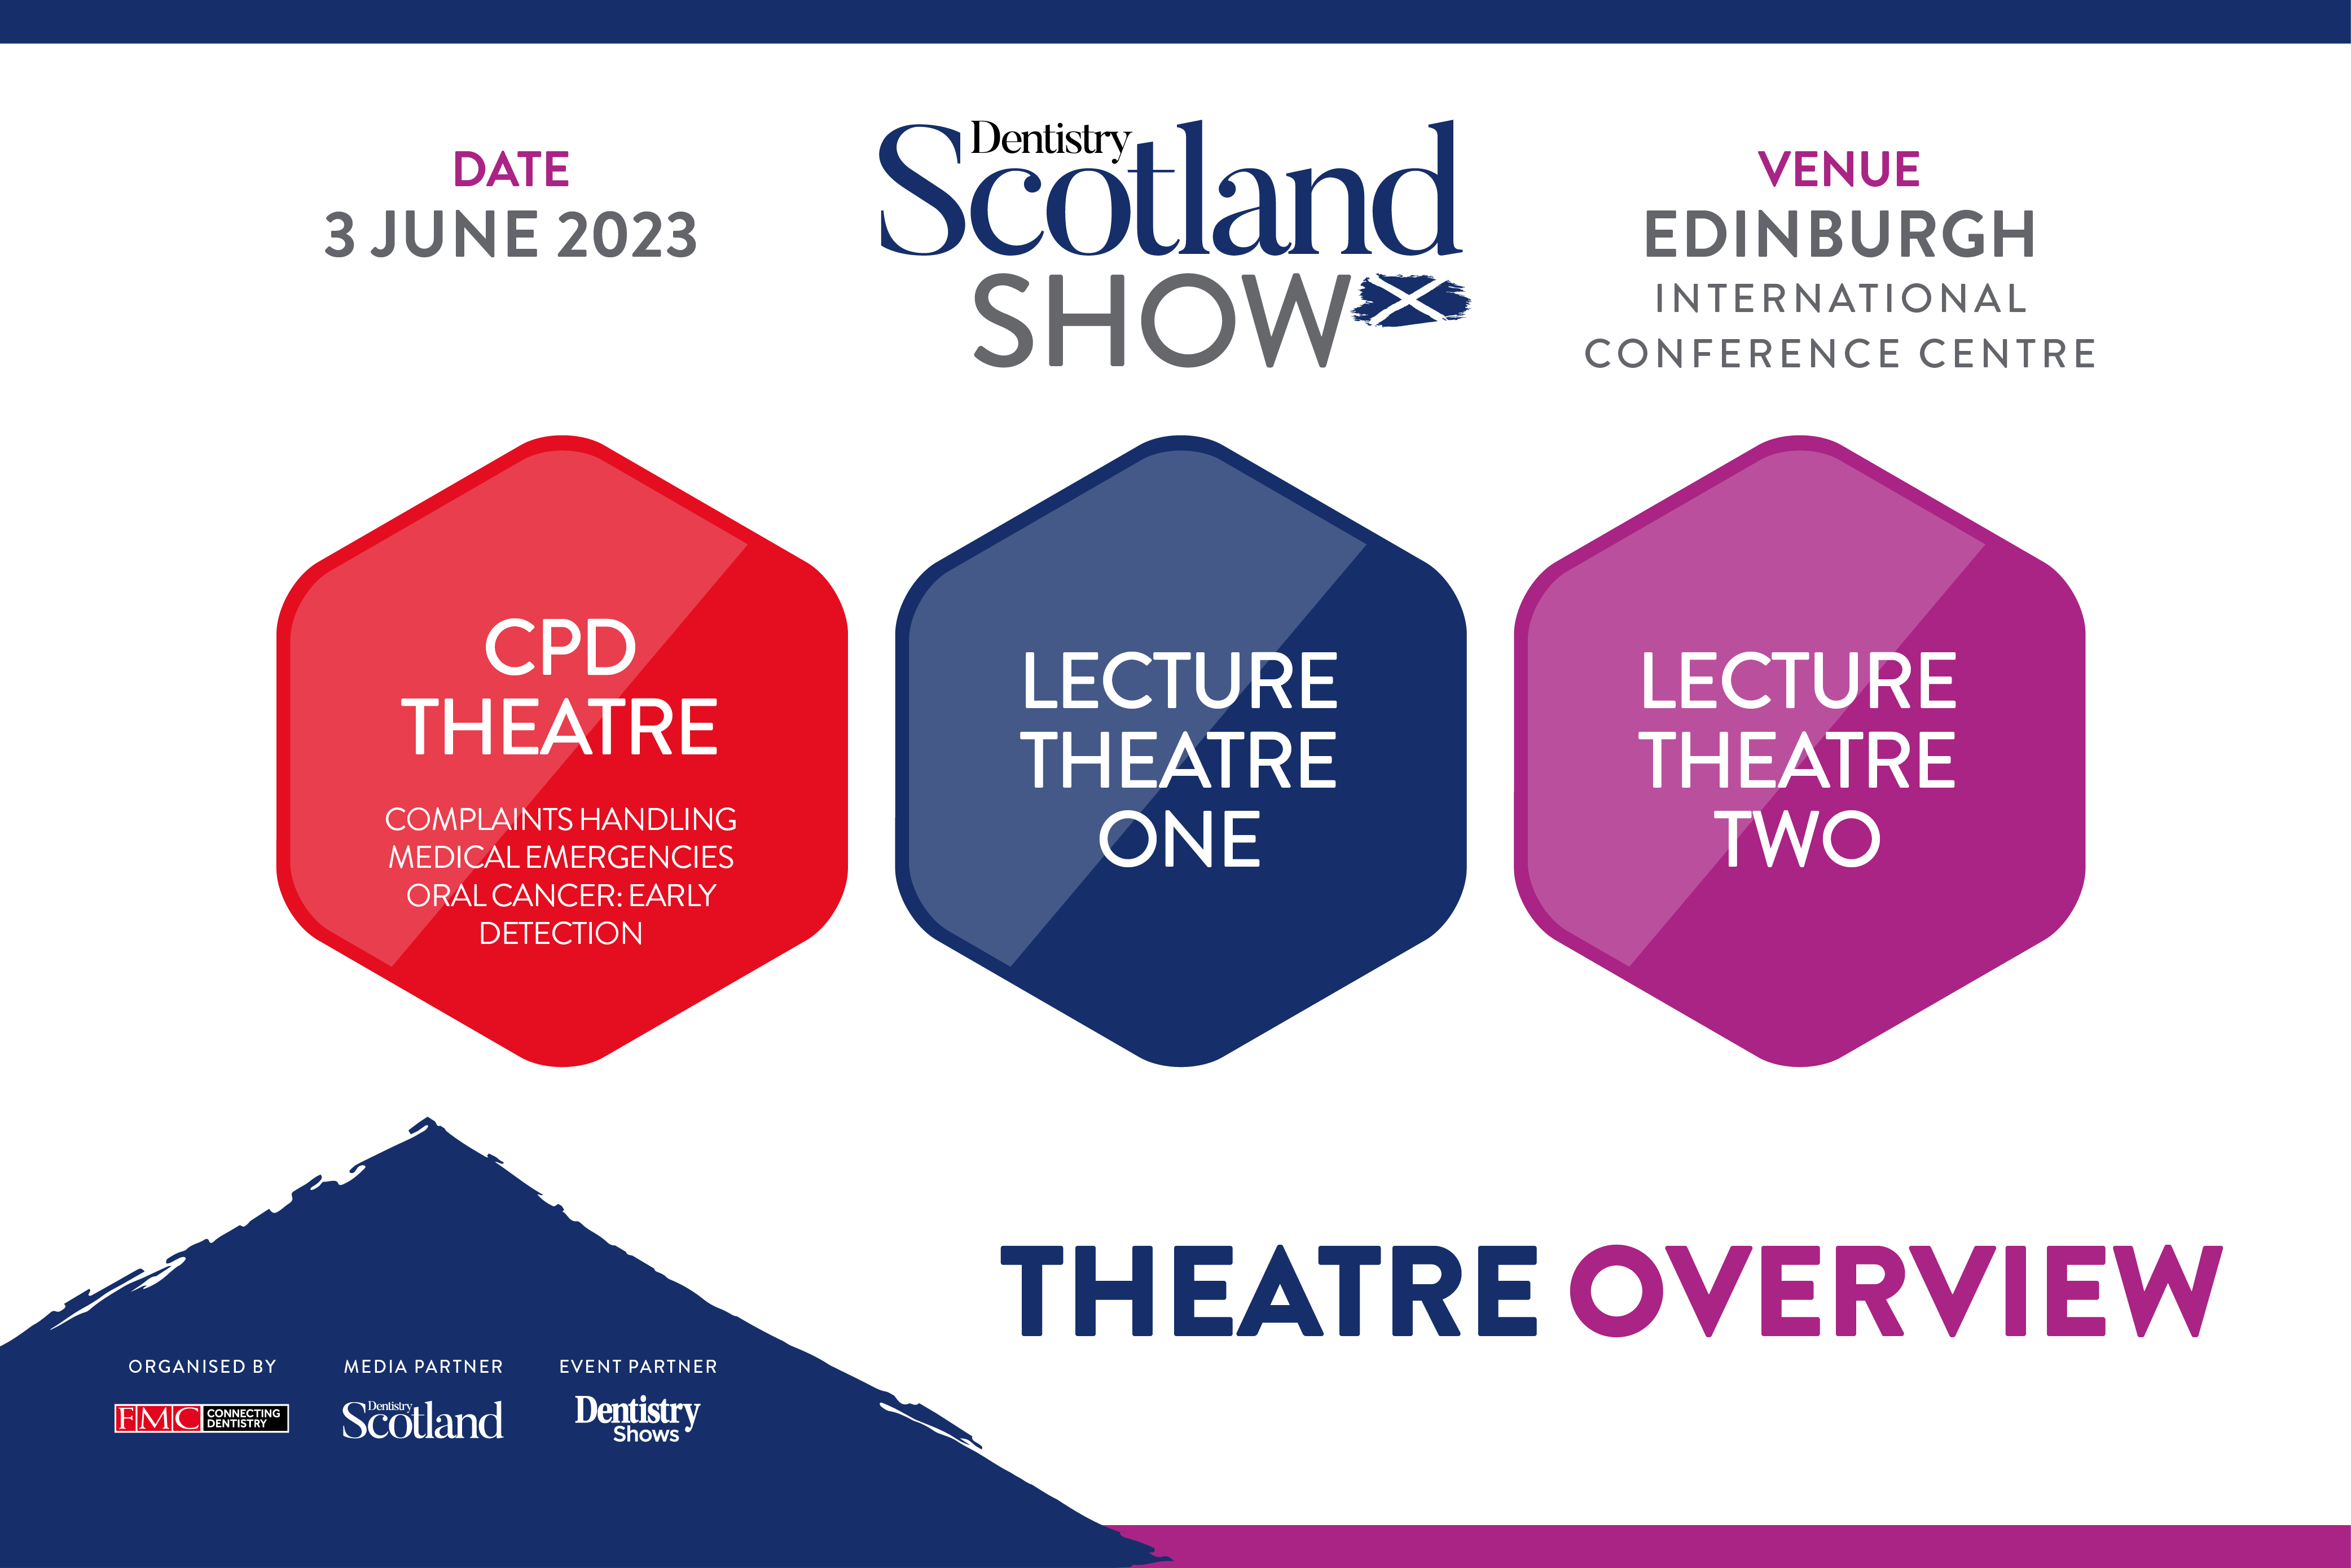 With the 2023 Dentistry Scotland Show on the horizon, find out what each lecture theatre will have in store this June.